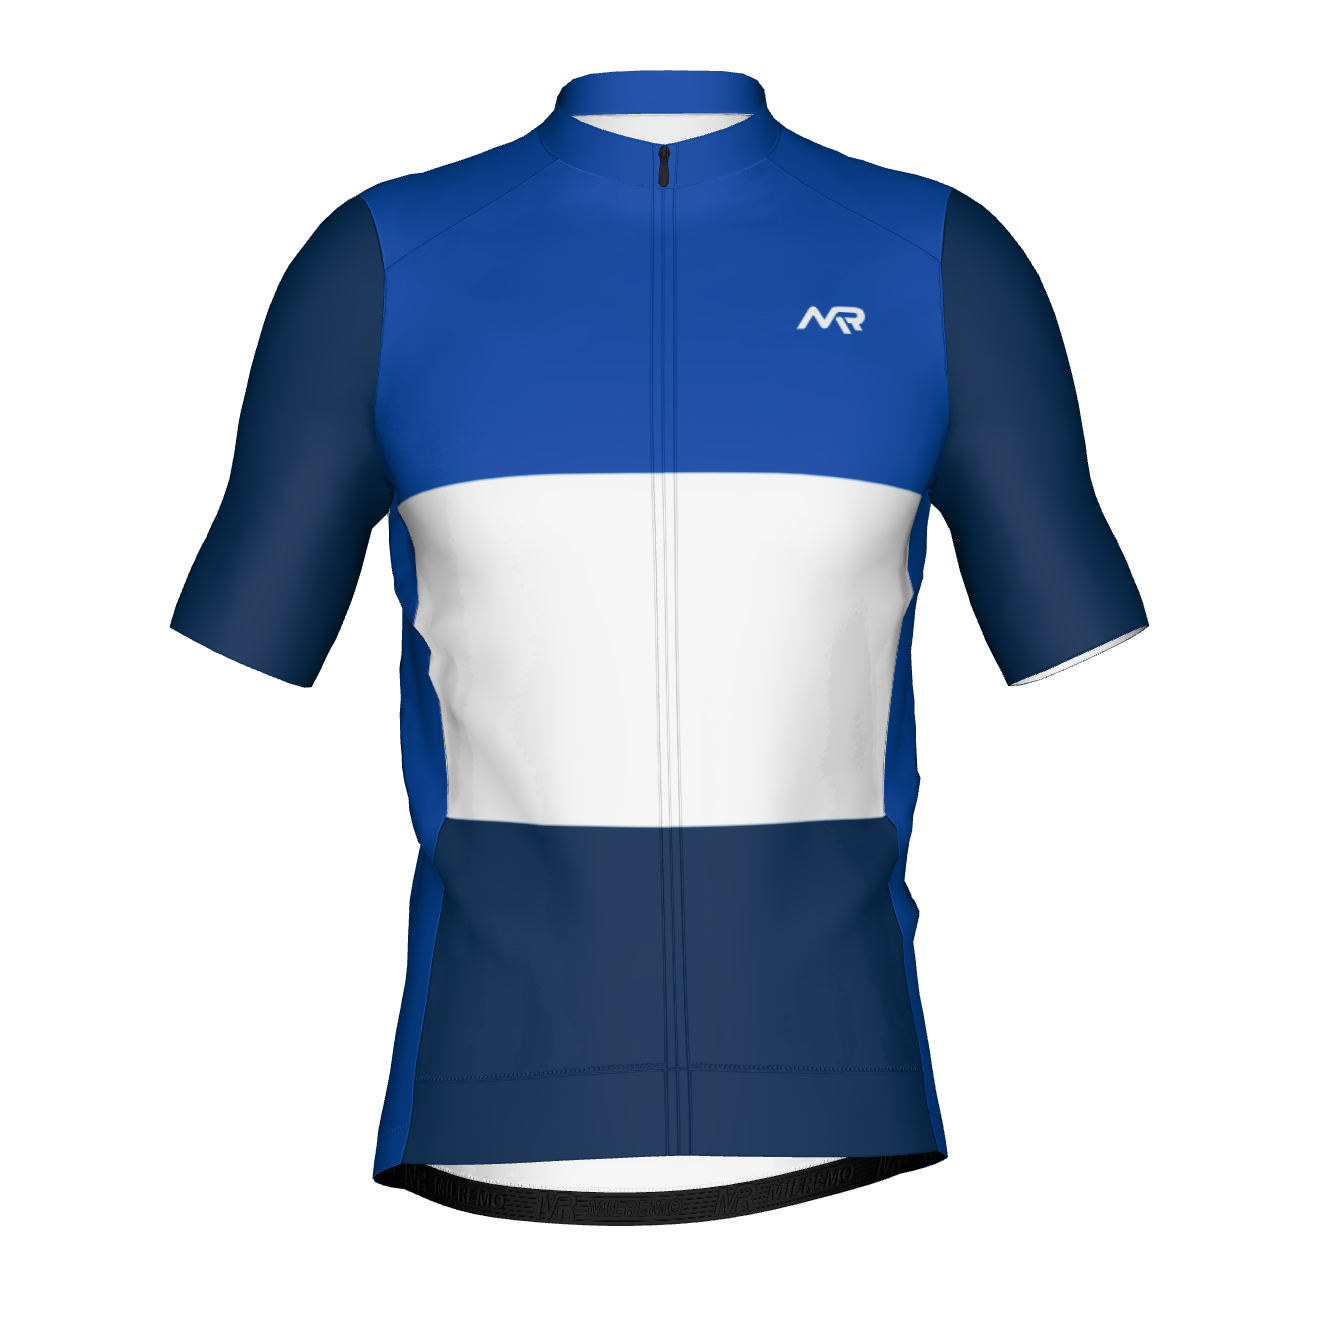 Criterium cycling jersey s/s